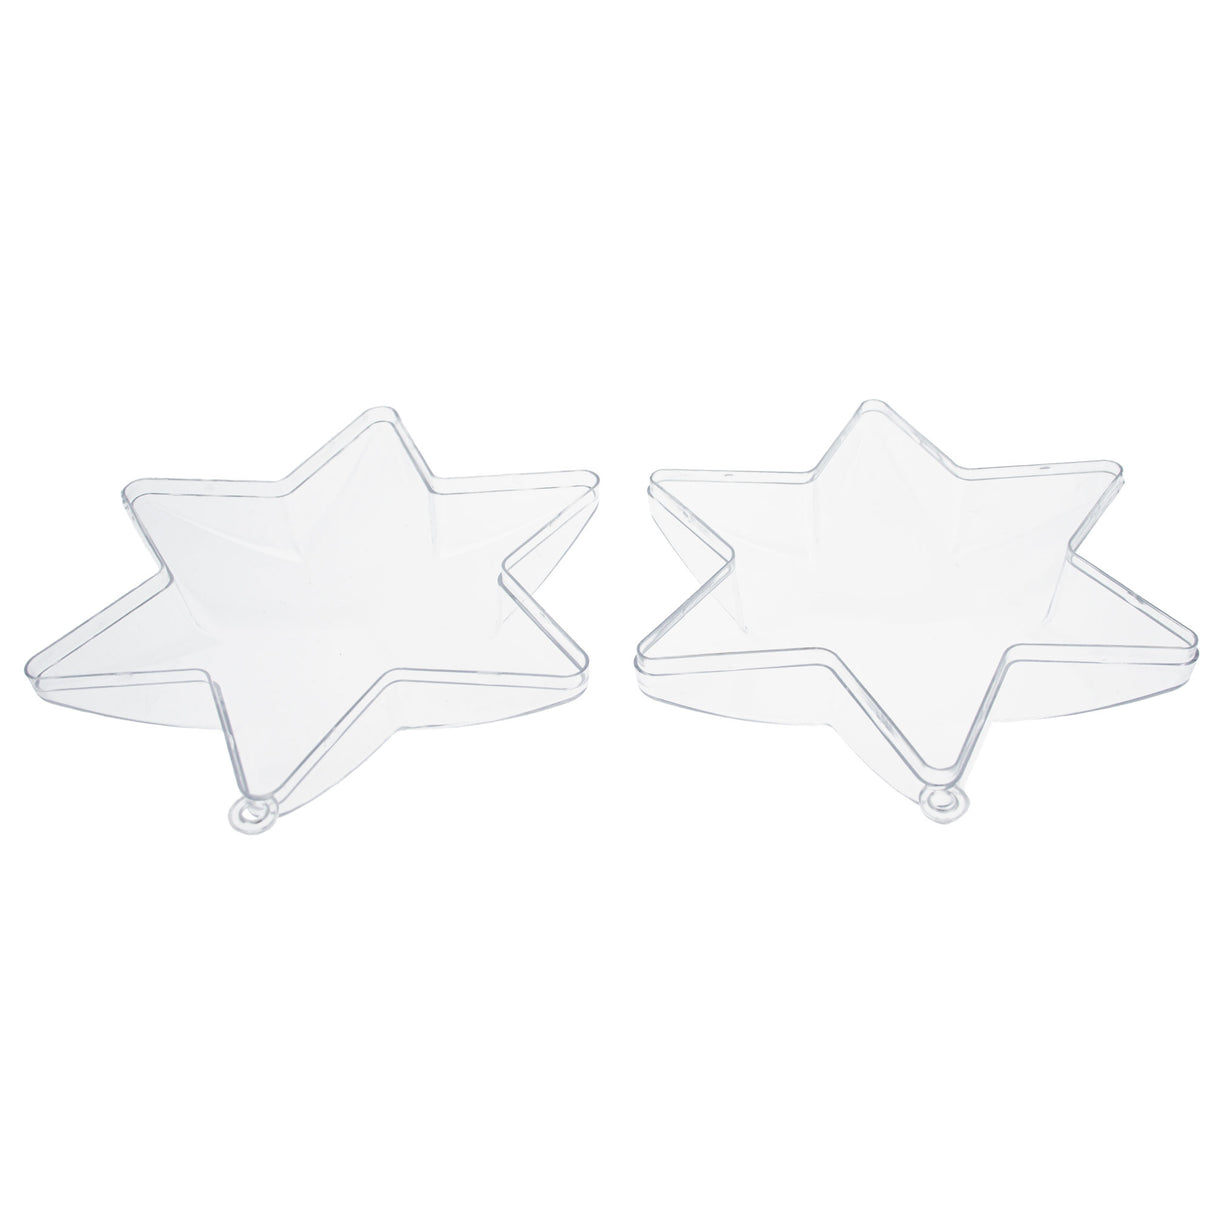 Set of 3 Clear Plastic Hexagon Ornaments 4 Inches ,dimensions in inches: 4 x  x 1.6